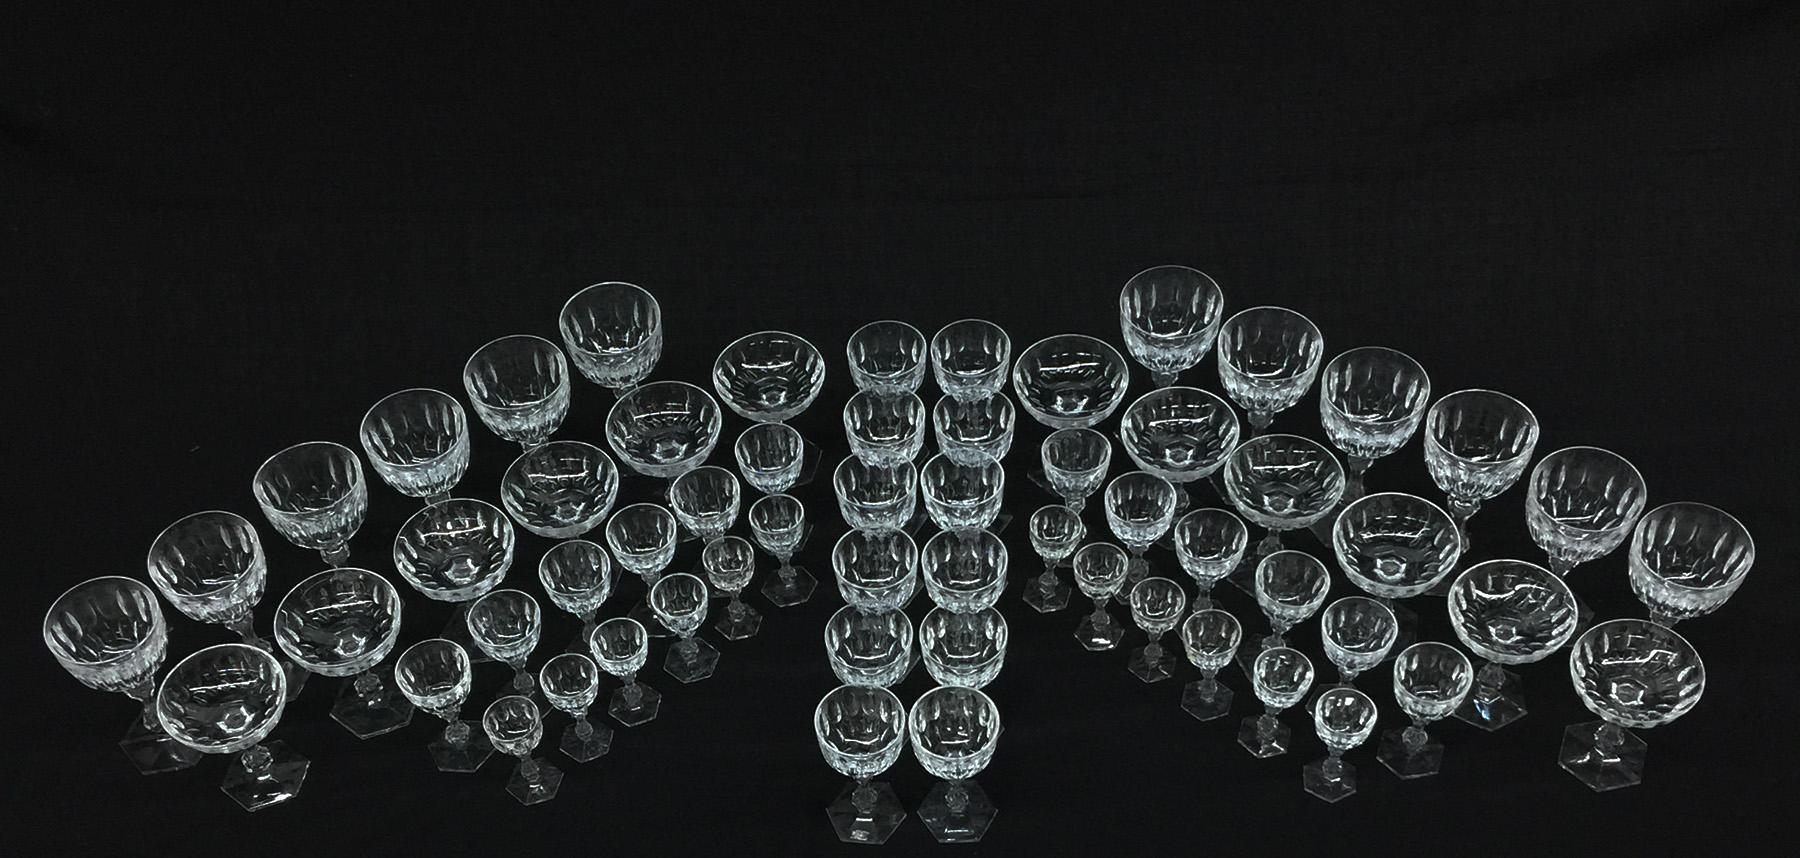 Early 19th century English crystal cut glass

Large set of crystal glass consists of 60 pieces of glasses
Beautiful English crystal glass for wine, champaign and liqueur
The large wine glass measurement is 9 cm diagonal and 16 cm high.
 